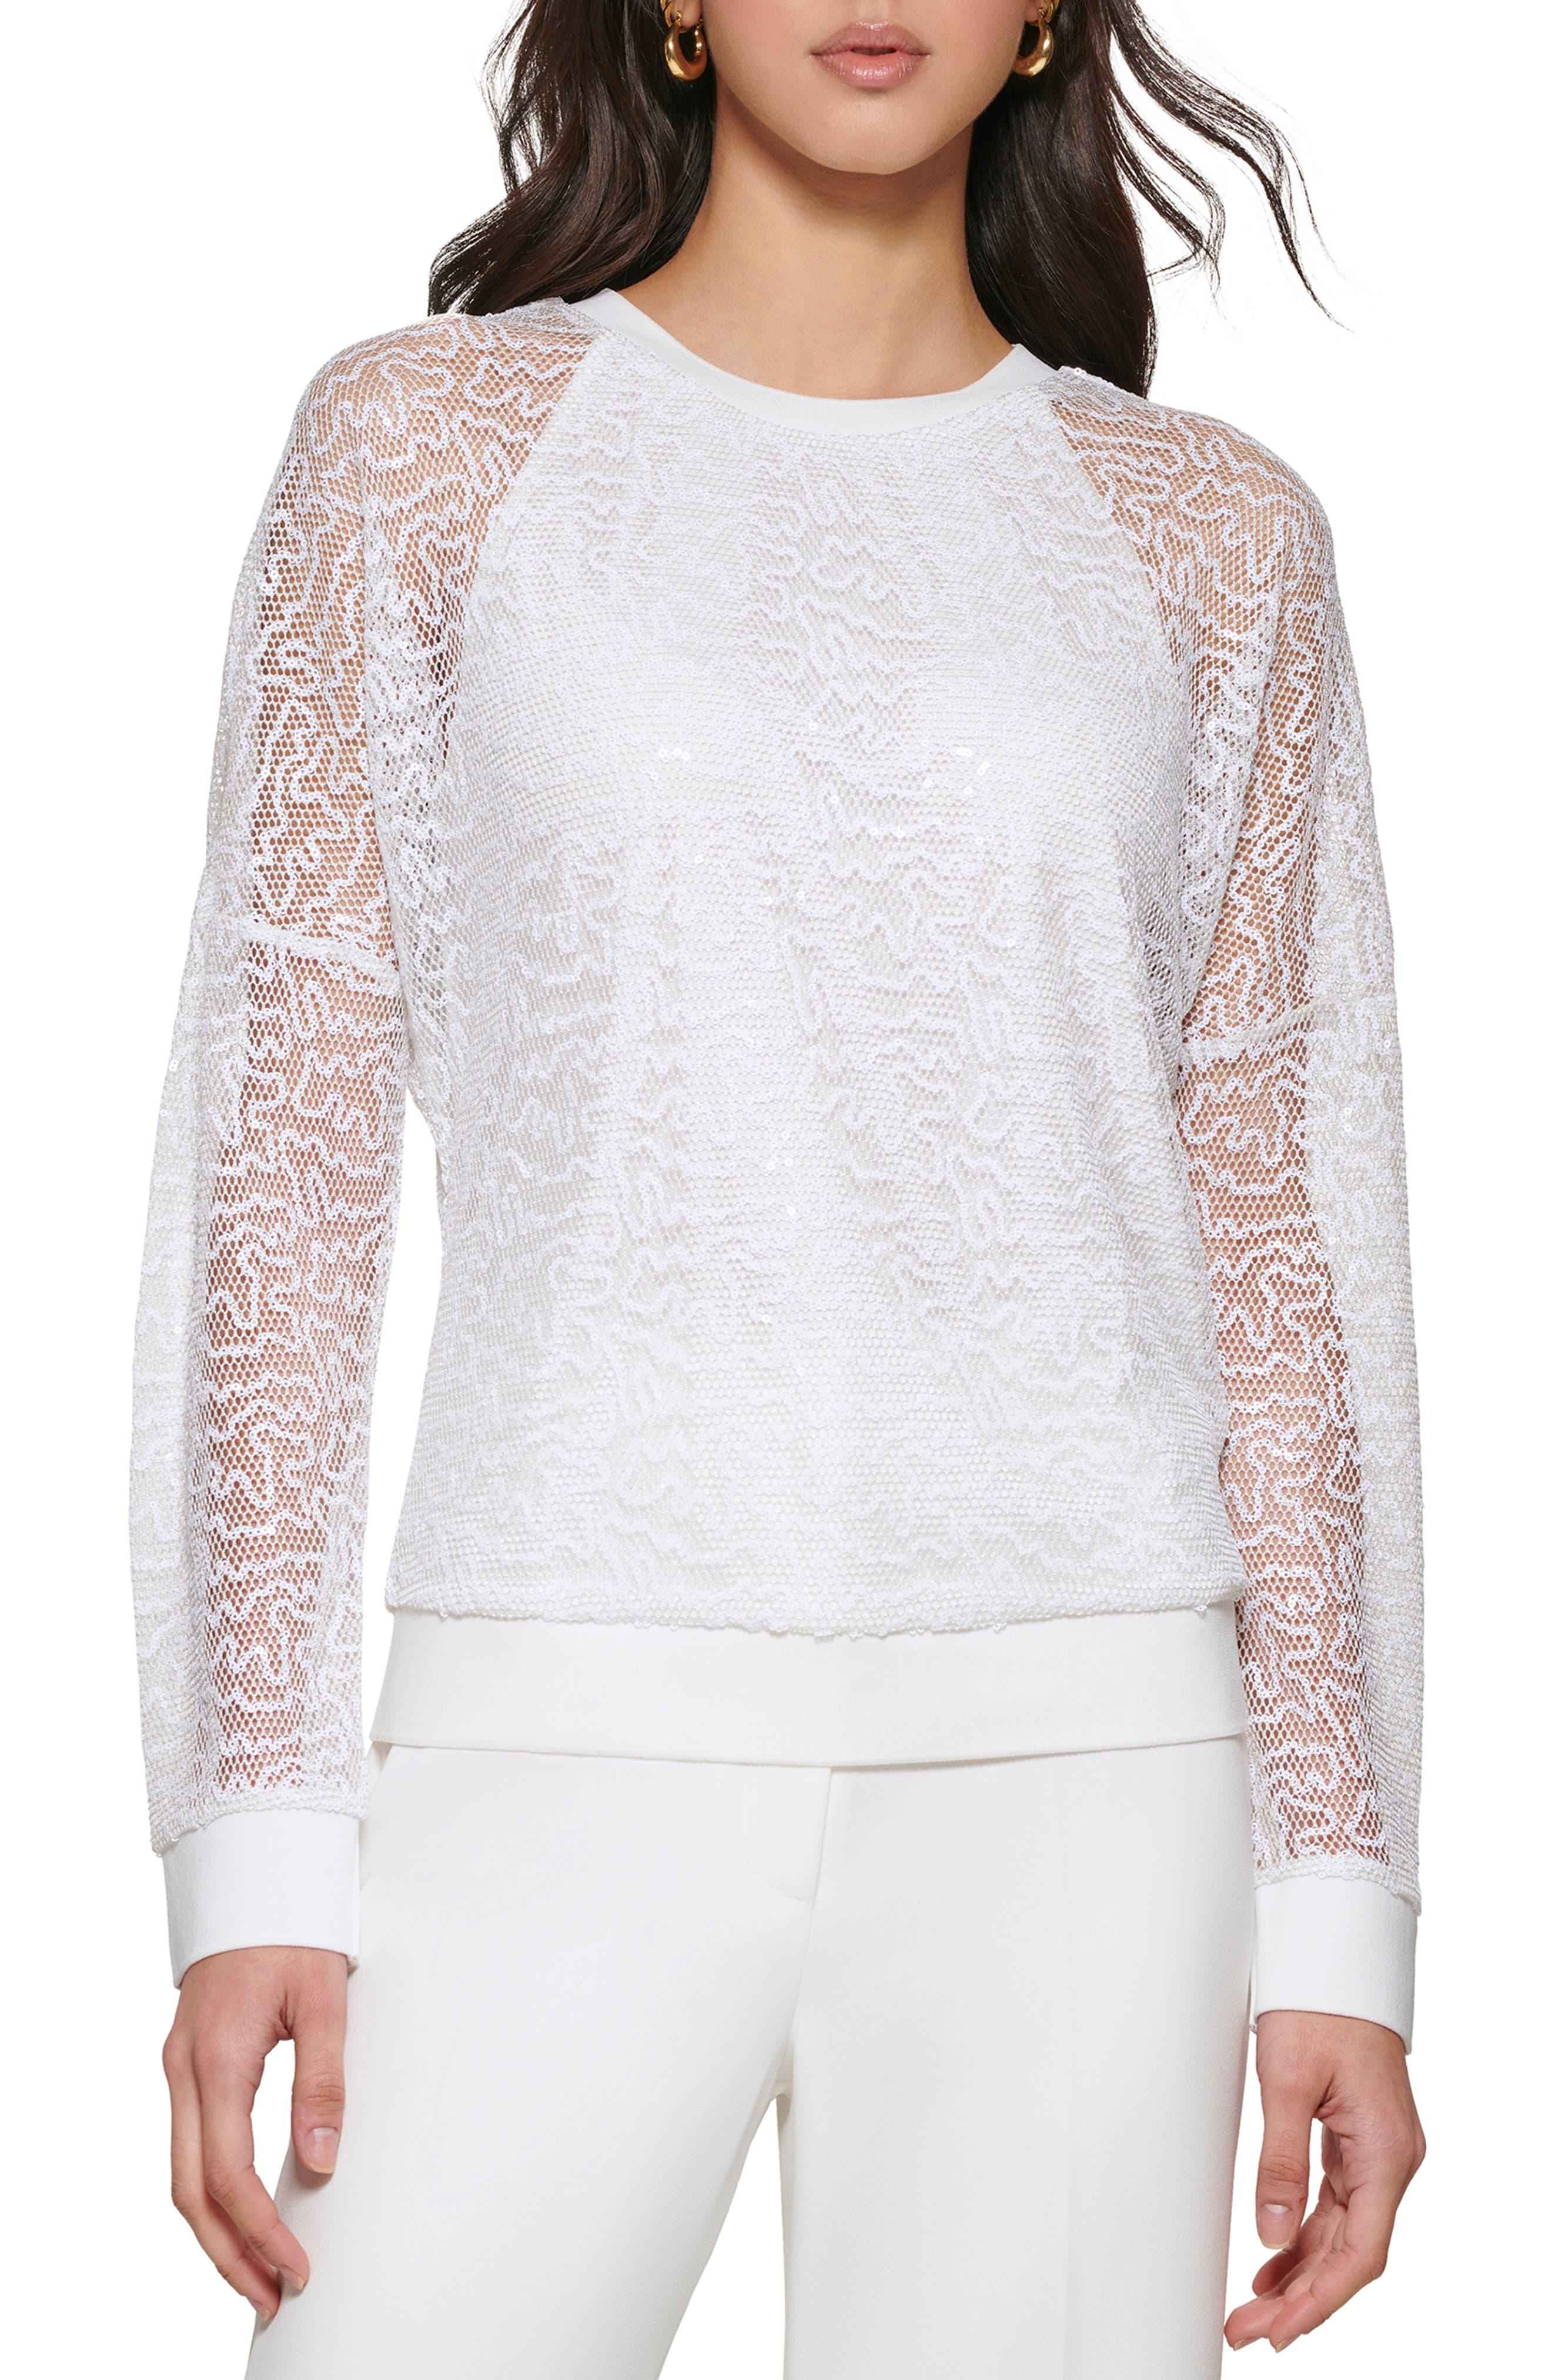 DKNY Sequin Mesh Overlay Crewneck Top in White | Lyst